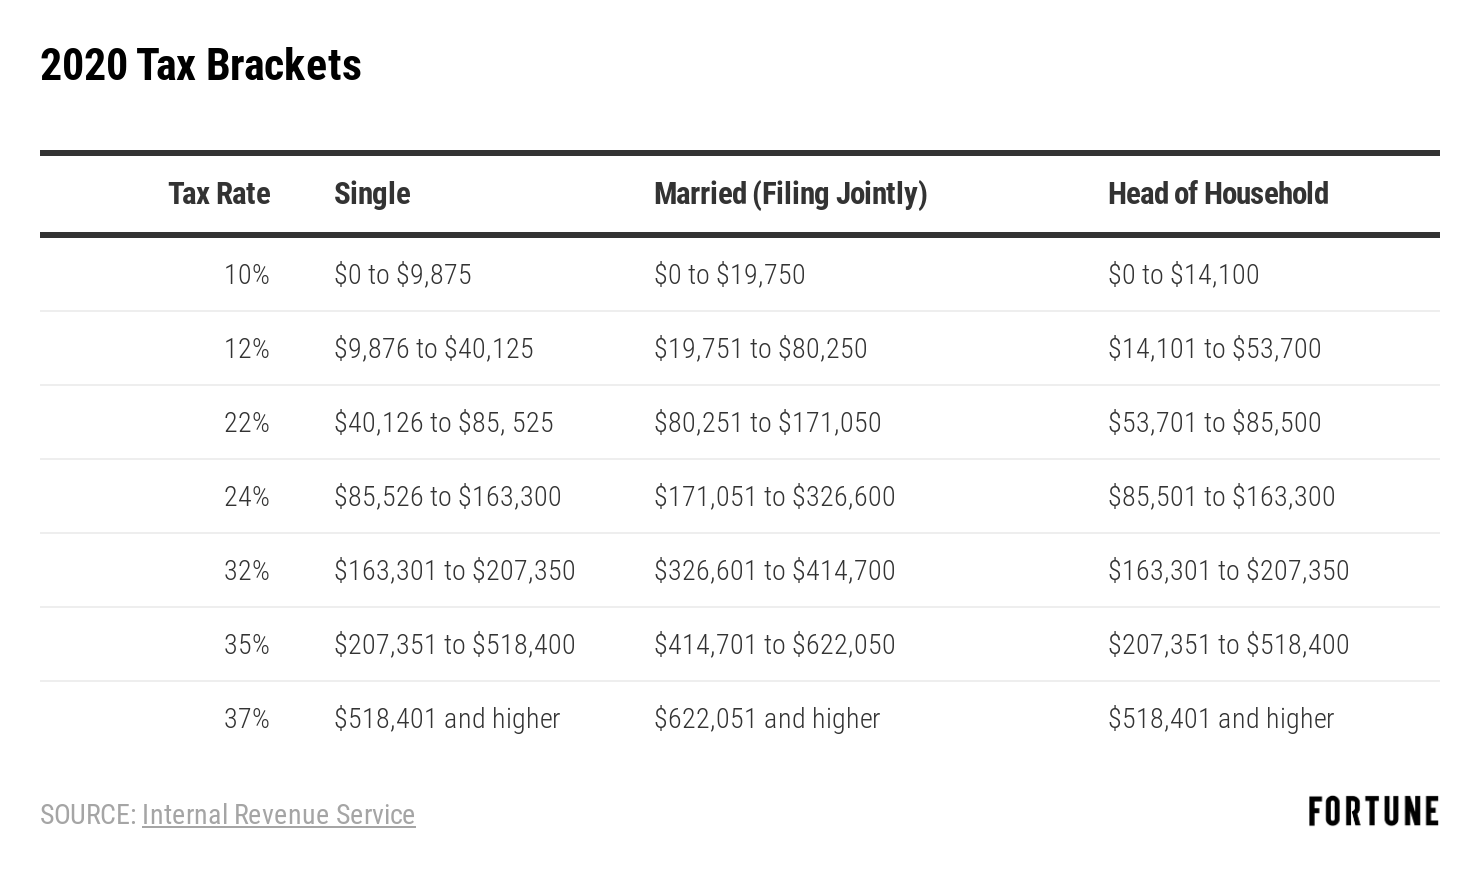 2020 Tax Brackets, Rates Releasedirs: What Am I Paying